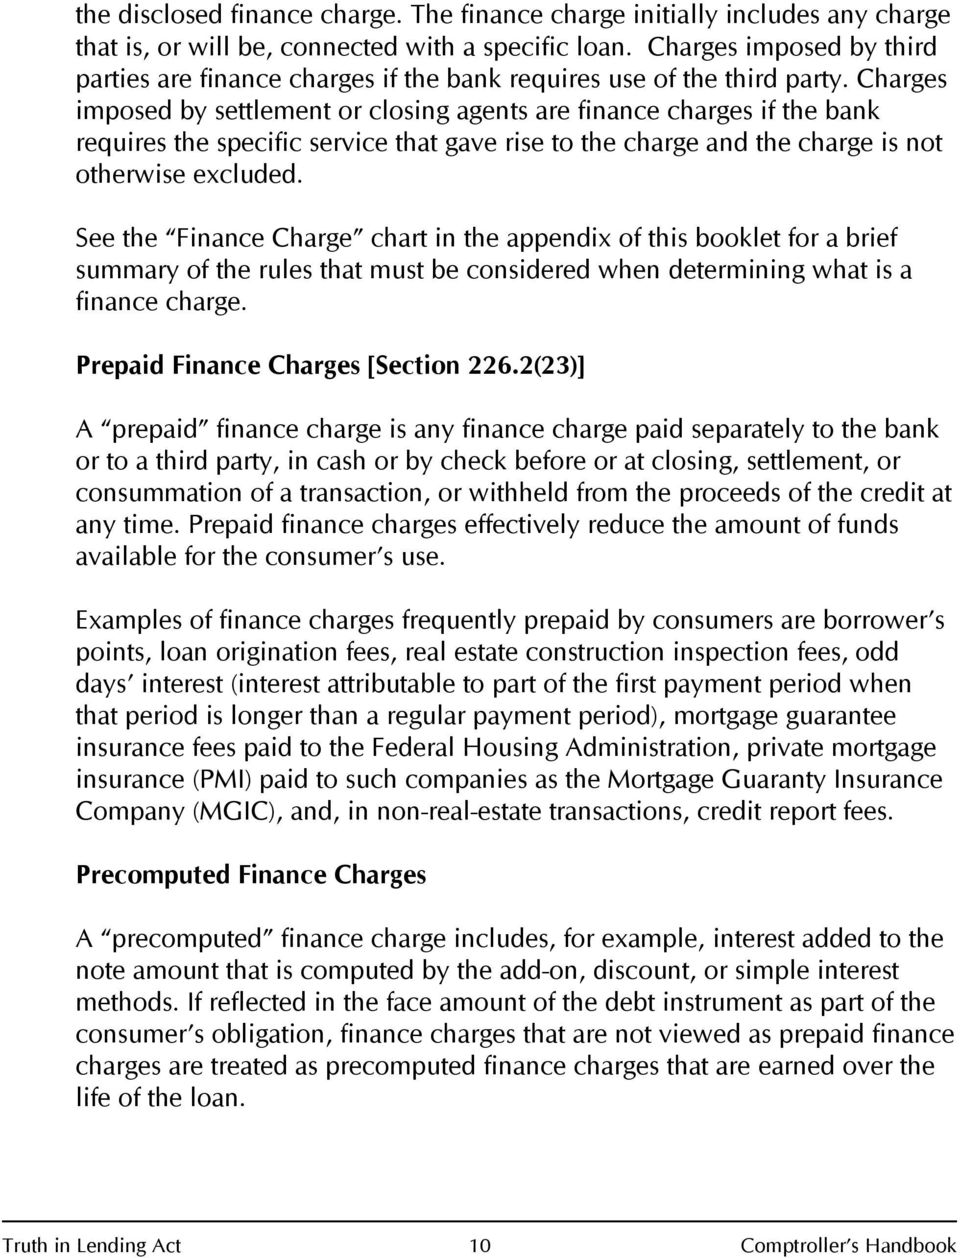 Charges imposed by settlement or closing agents are finance charges if the bank requires the specific service that gave rise to the charge and the charge is not otherwise excluded.